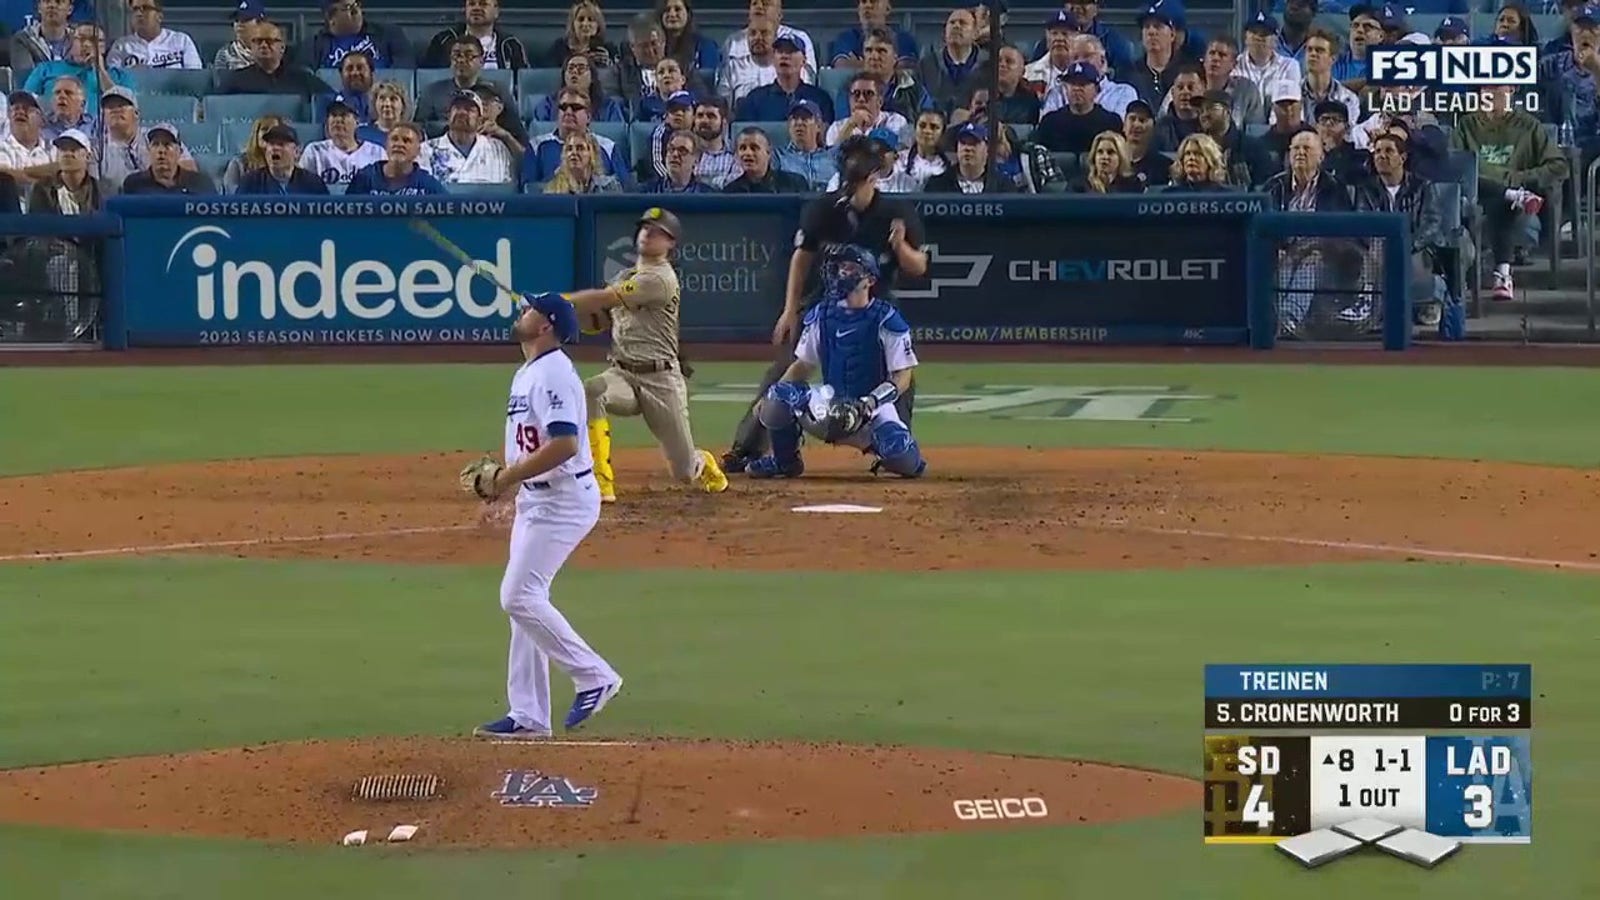 Jake Cronenworth hits a home run to extend the lead over the Dodgers